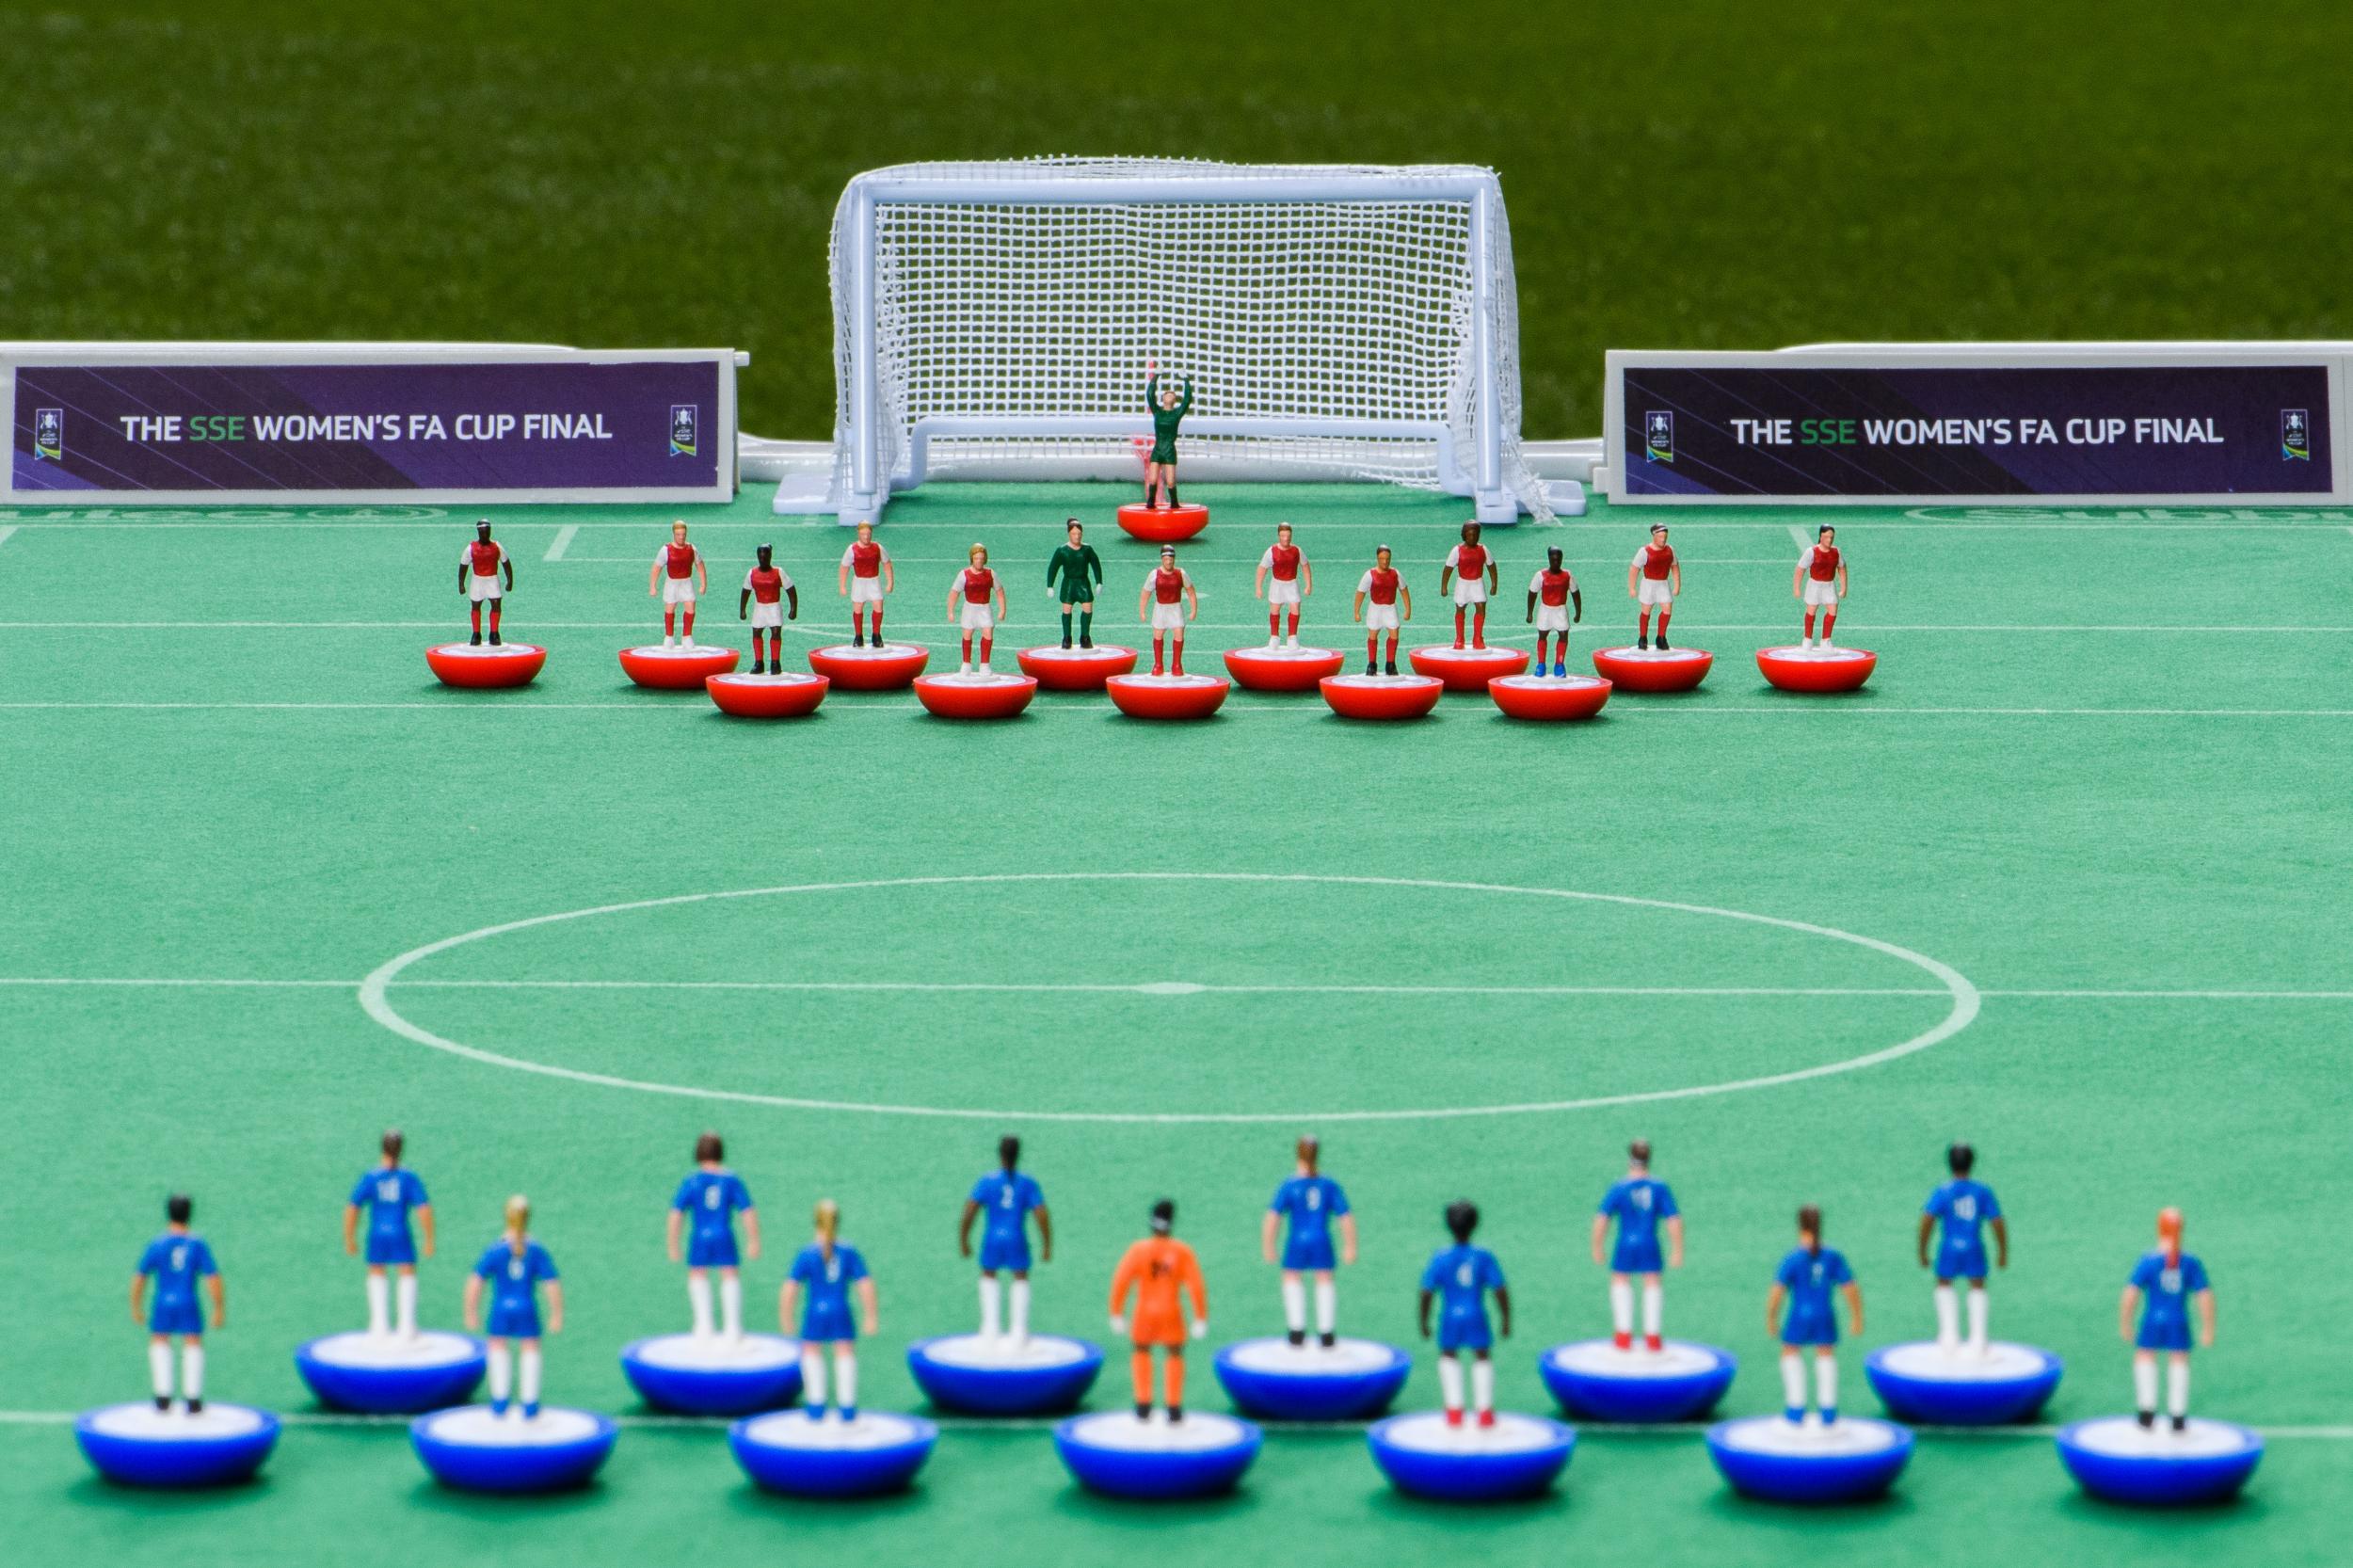 The limited edition Subbuteo all-female football set will feature the Arsenal and Chelsea teams